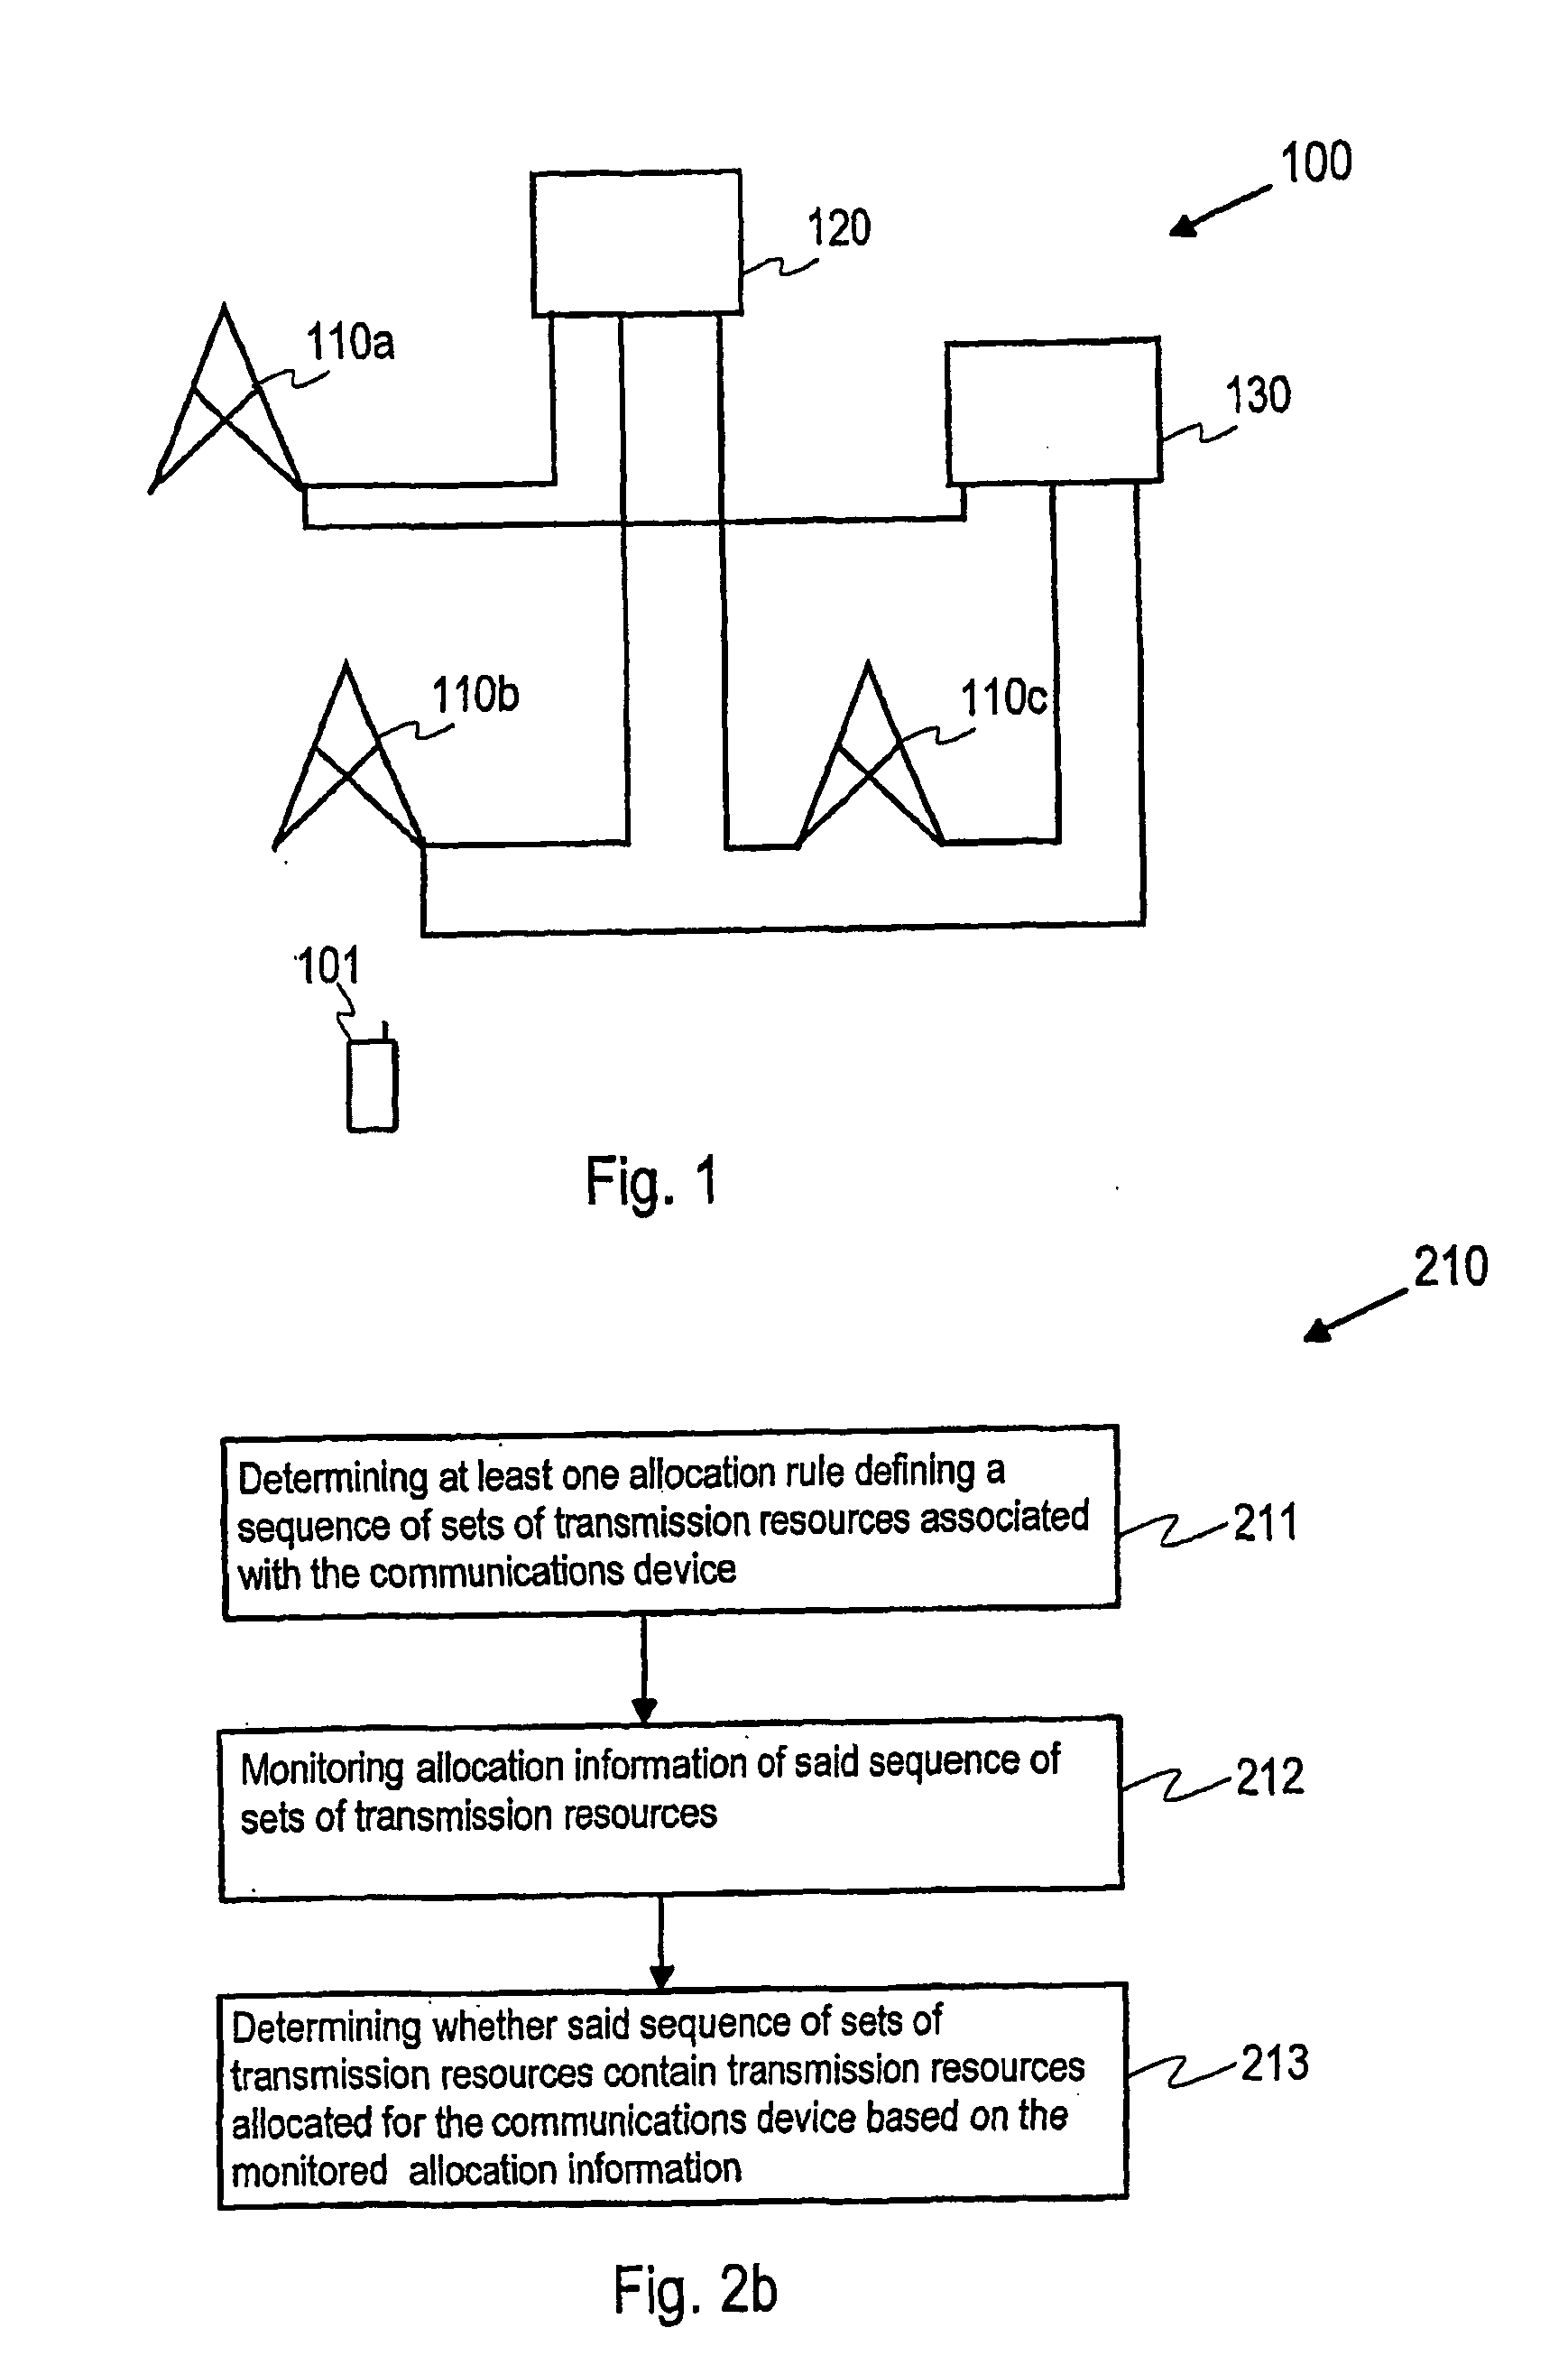 Discontinuous Transmission/Reception in a Communications System